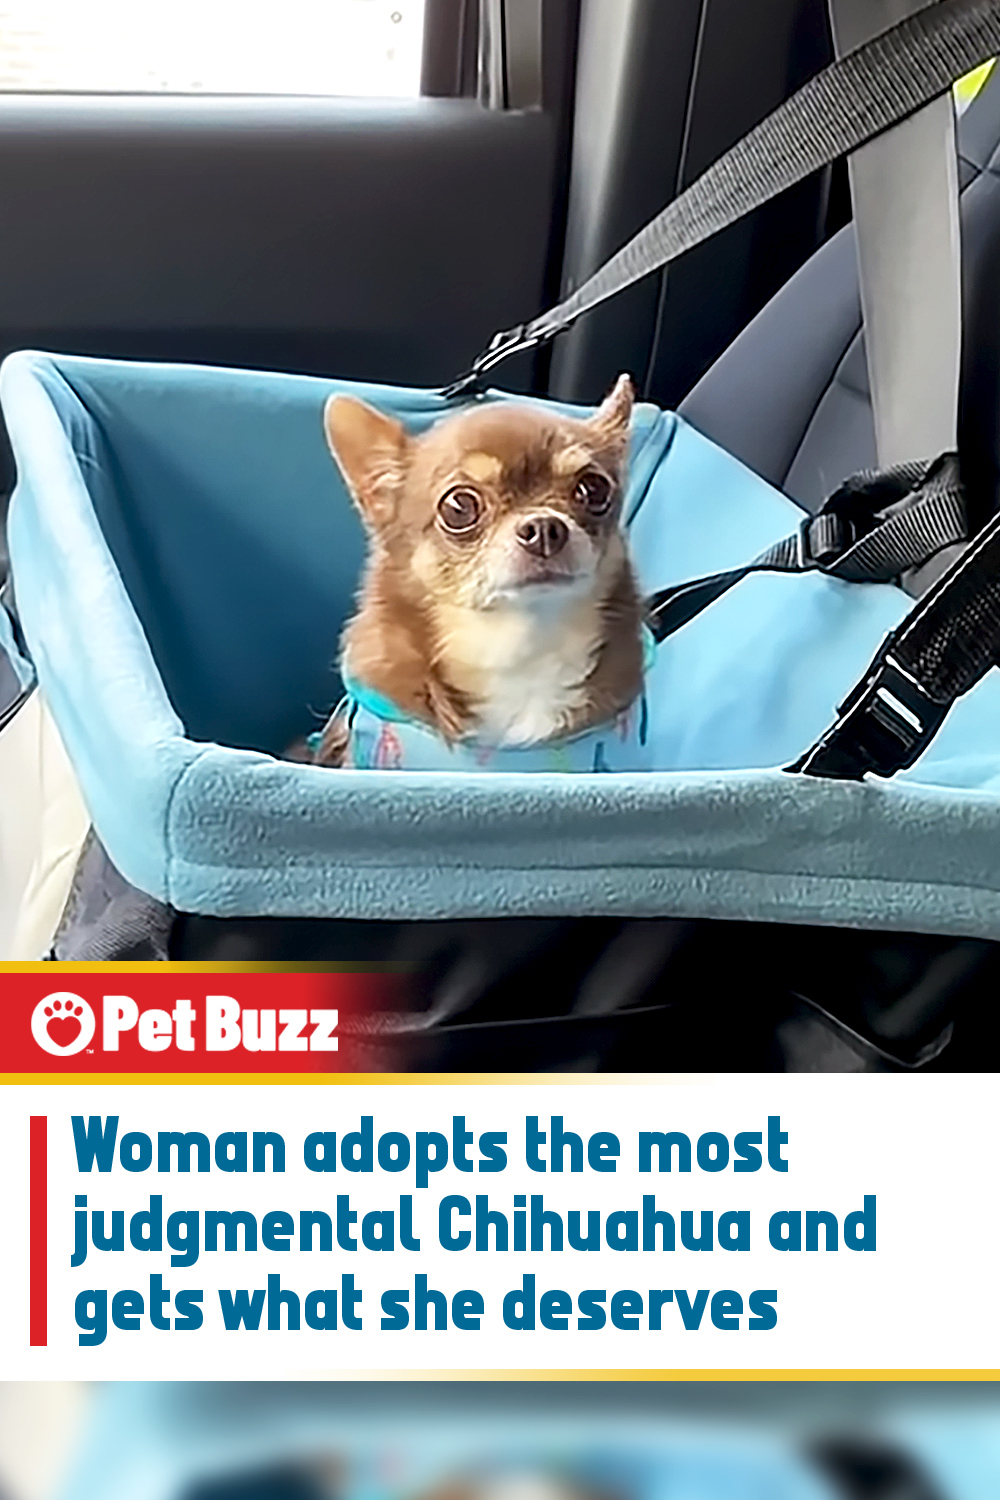 Woman adopts the most judgmental Chihuahua and gets what she deserves